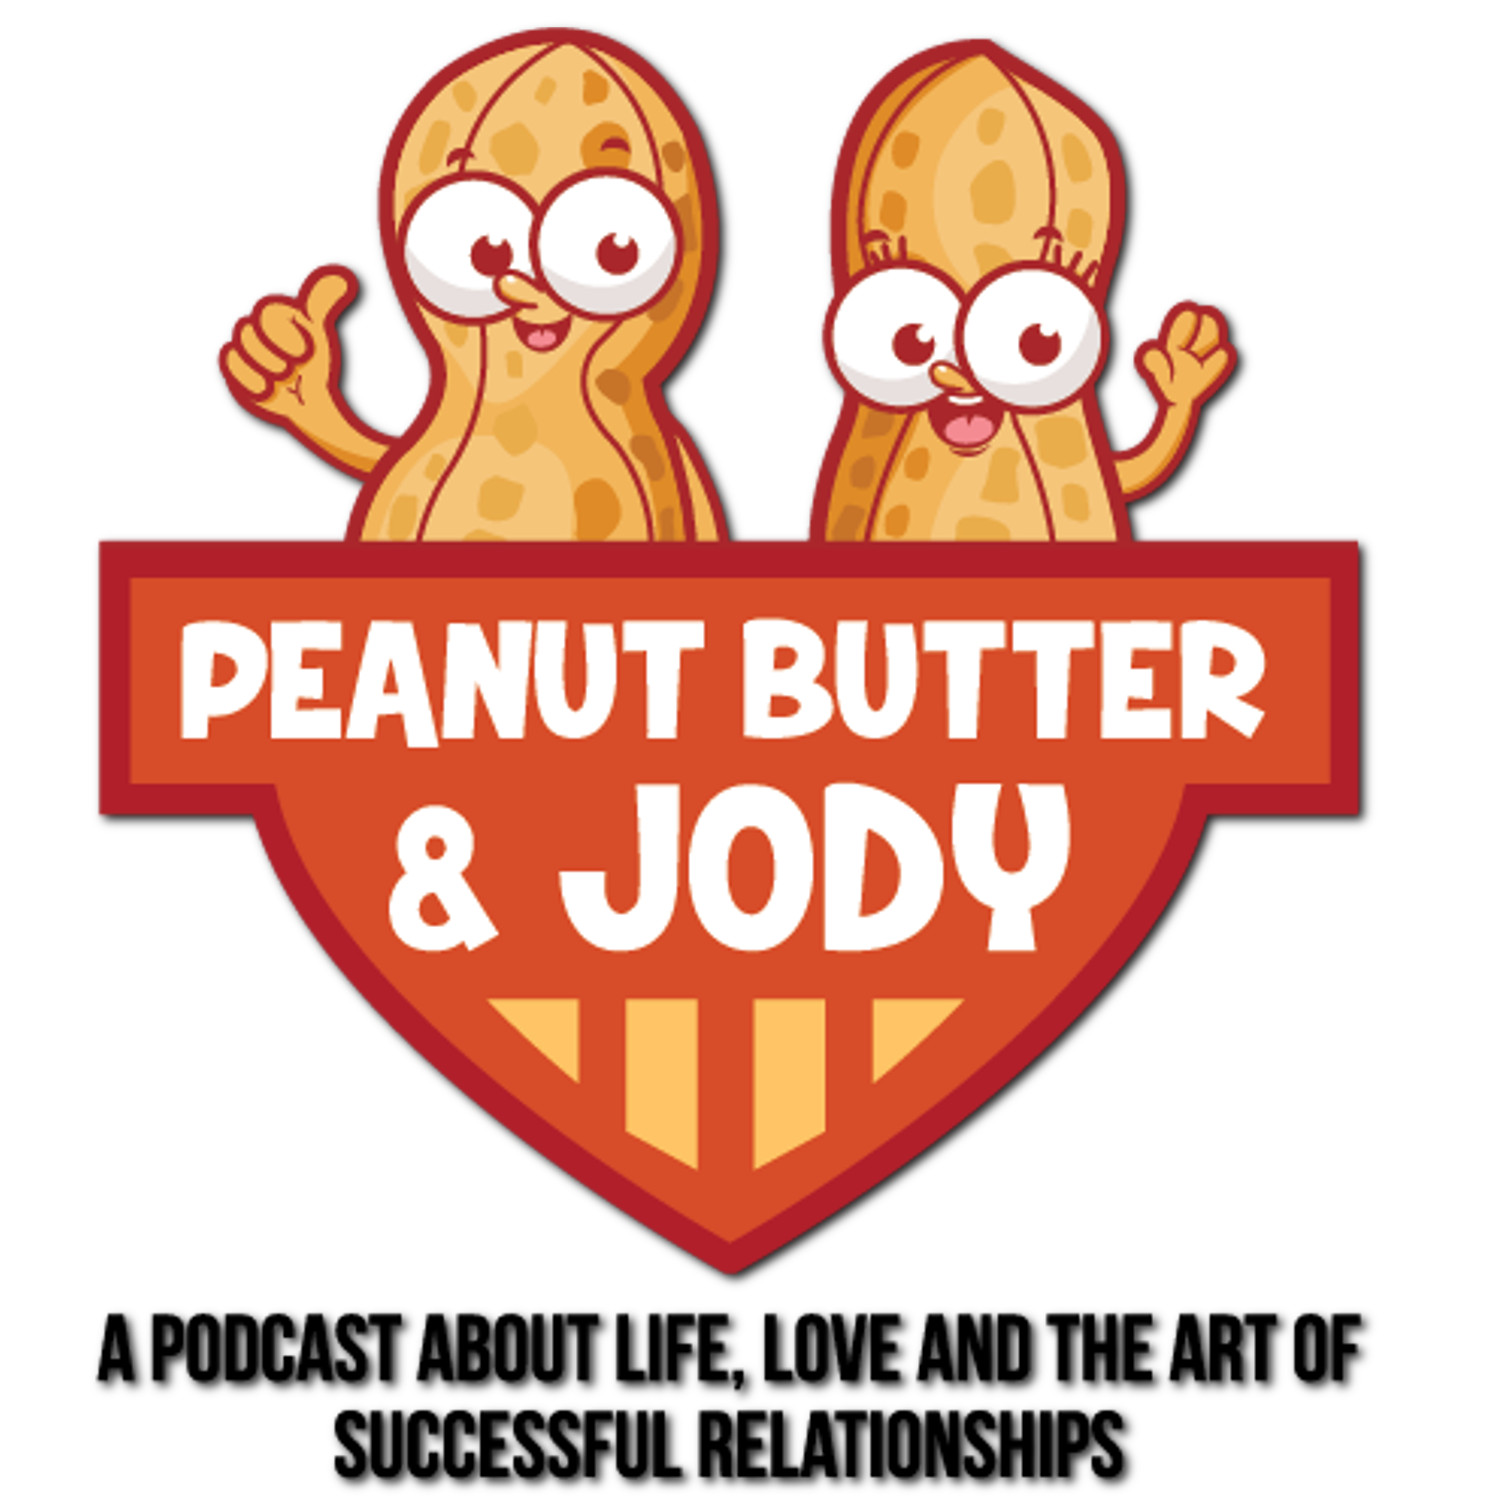 The Peanut Butter and Jody Podcast